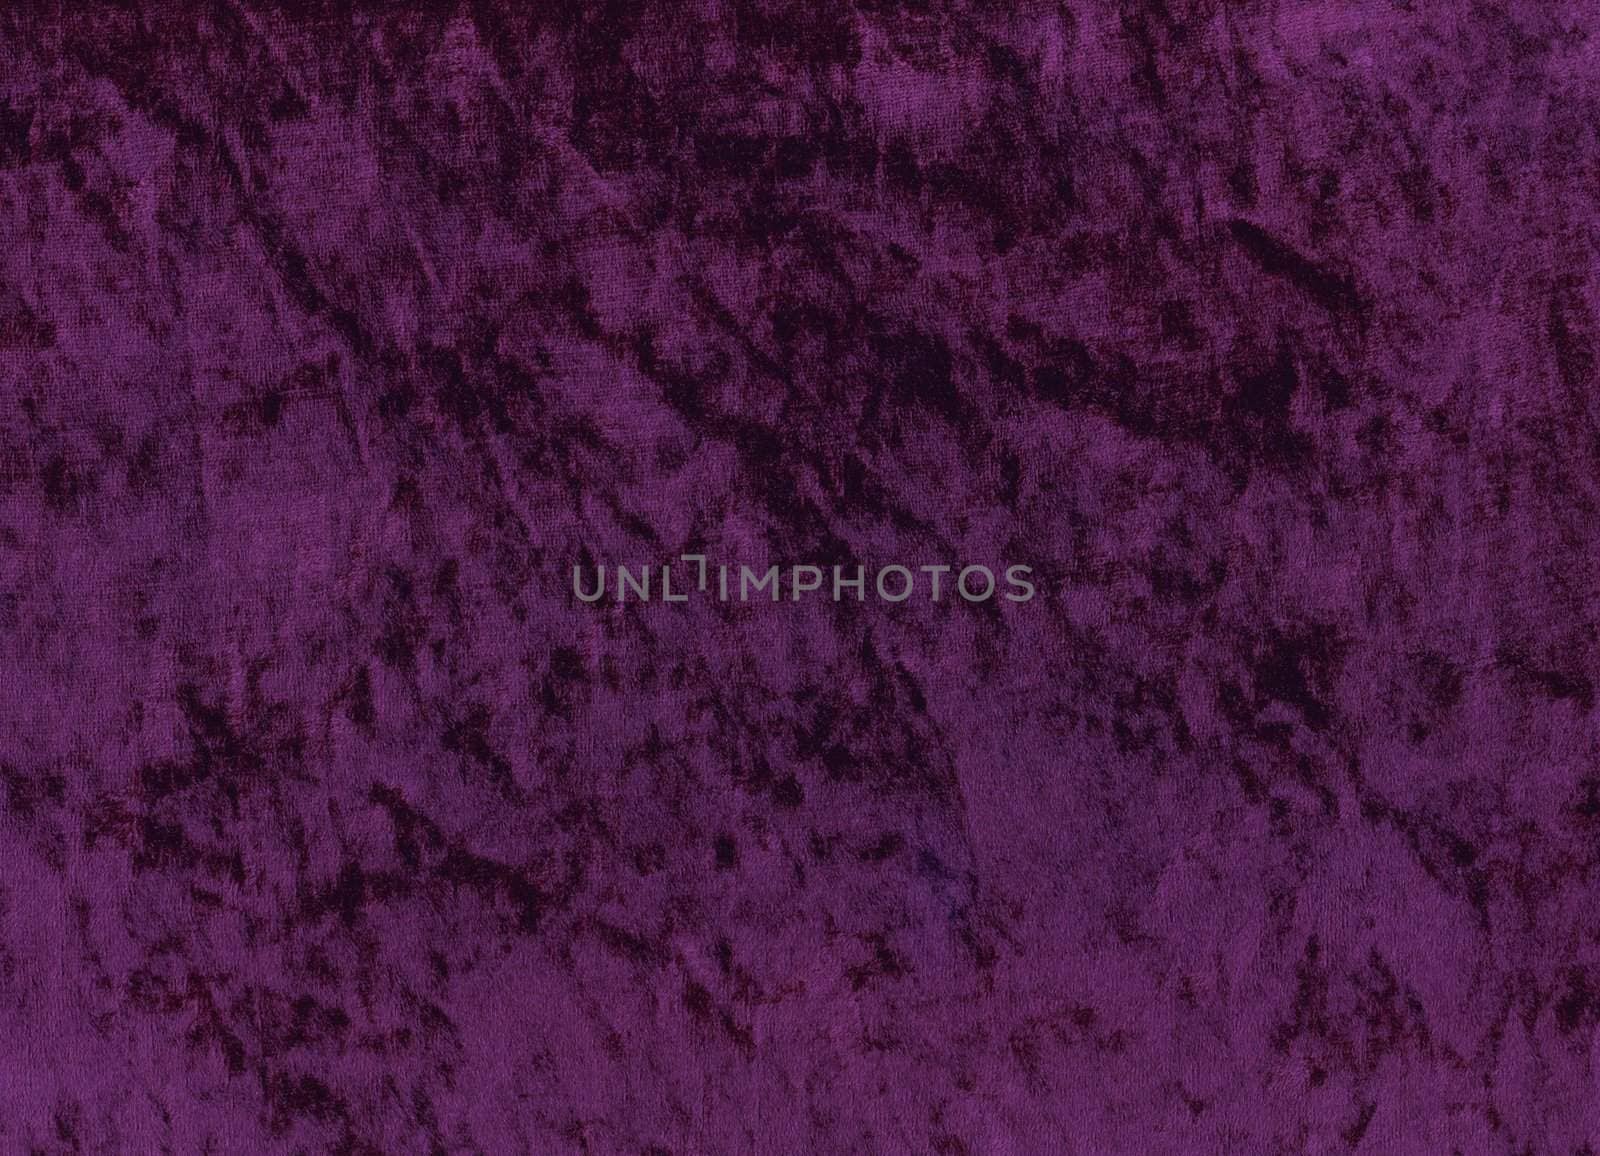 A sample of purple shimmery velours fabric - an exclusive and trendy background.